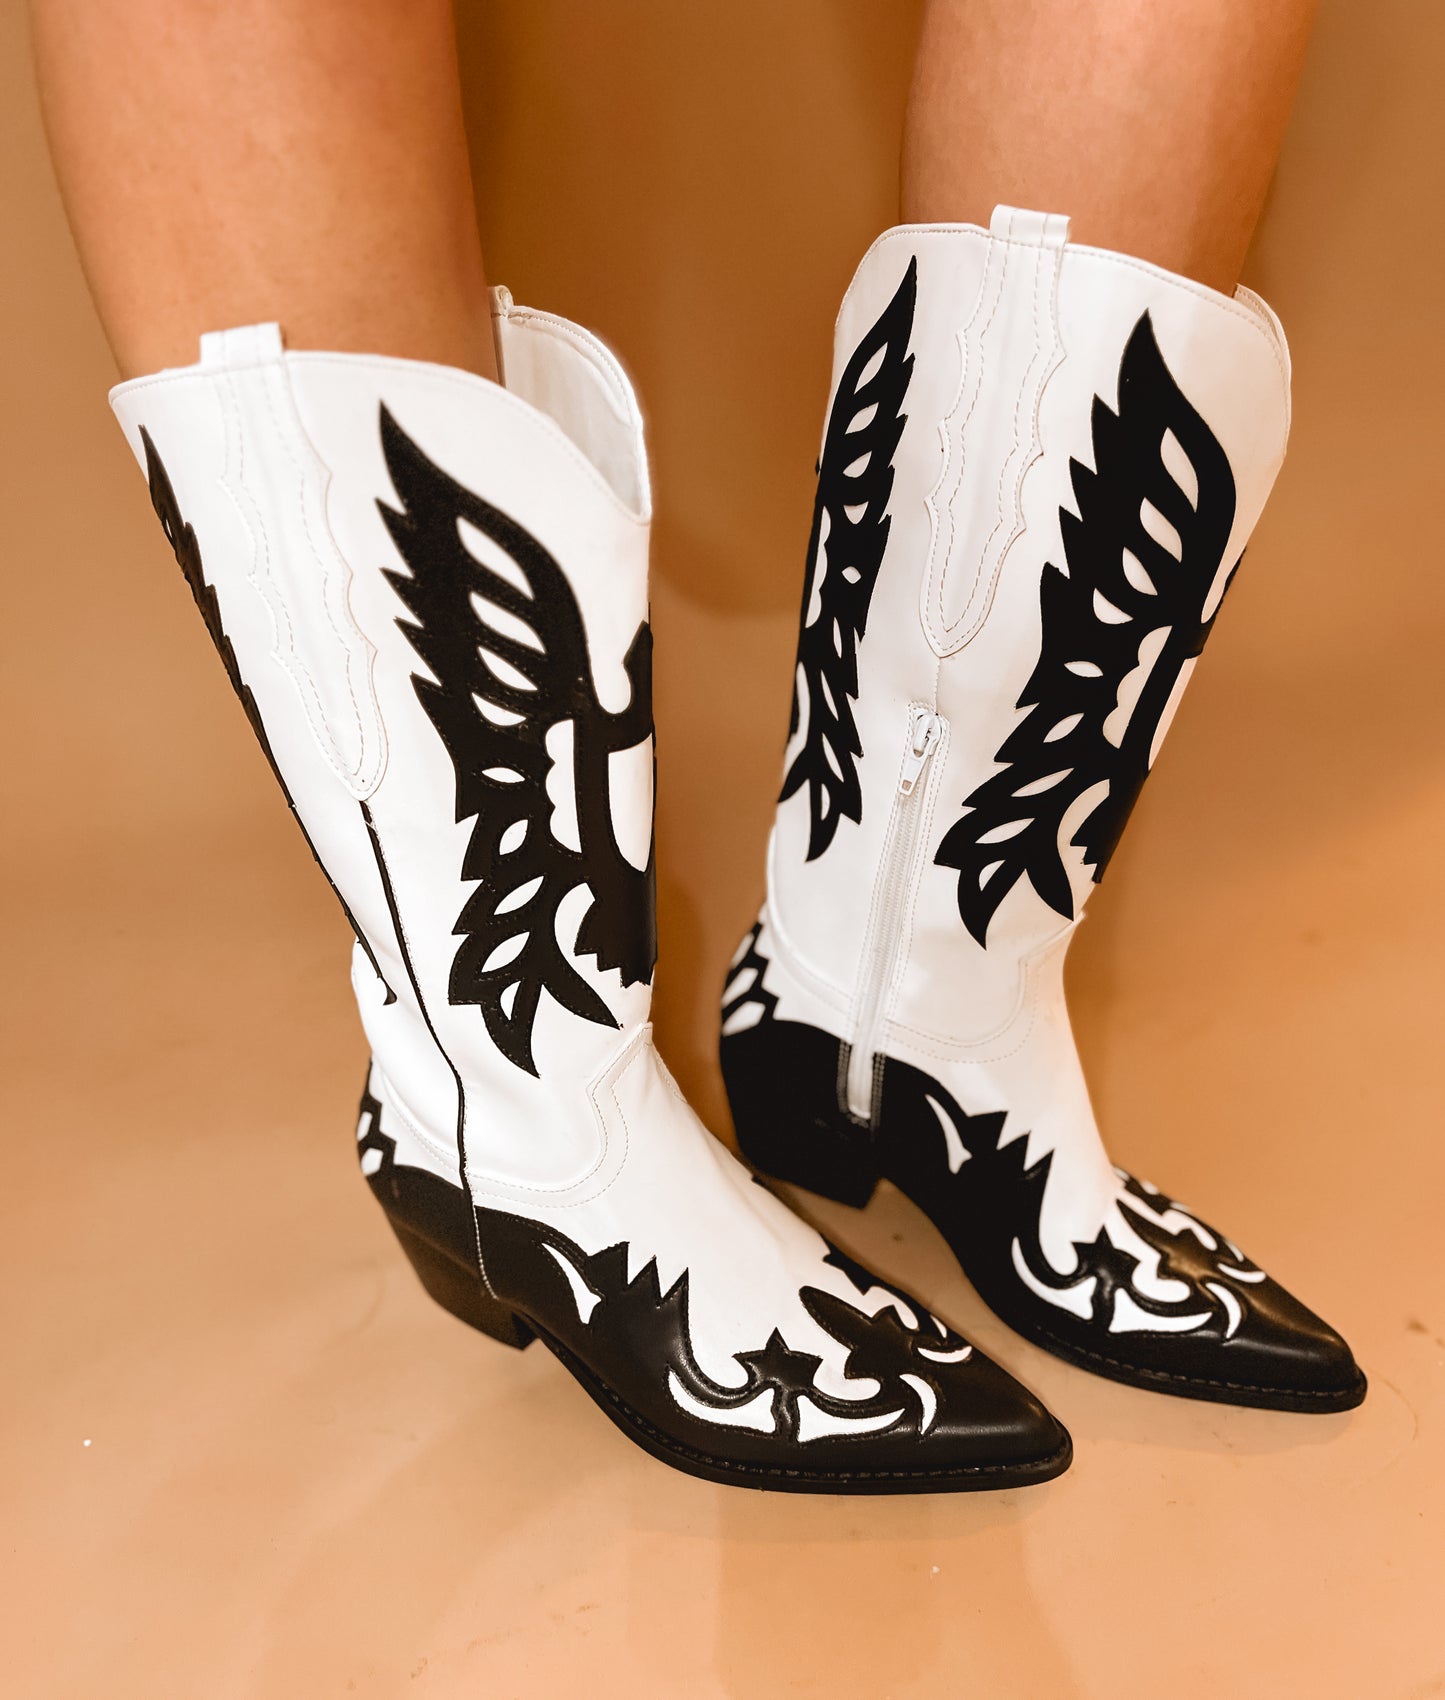 Spice mount black and white boot